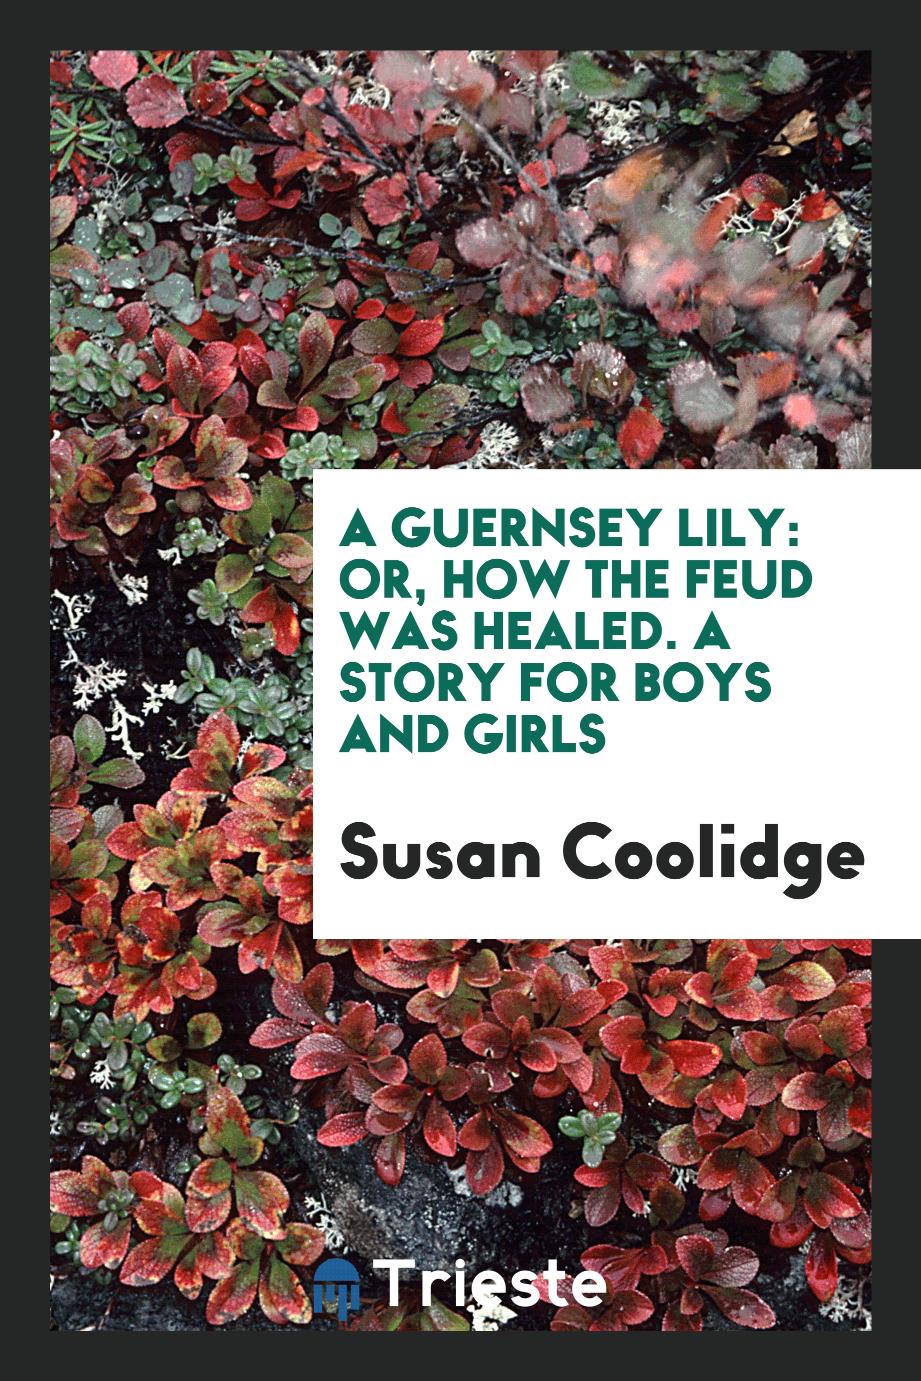 A Guernsey Lily: Or, How the Feud Was Healed. A Story for Boys and Girls